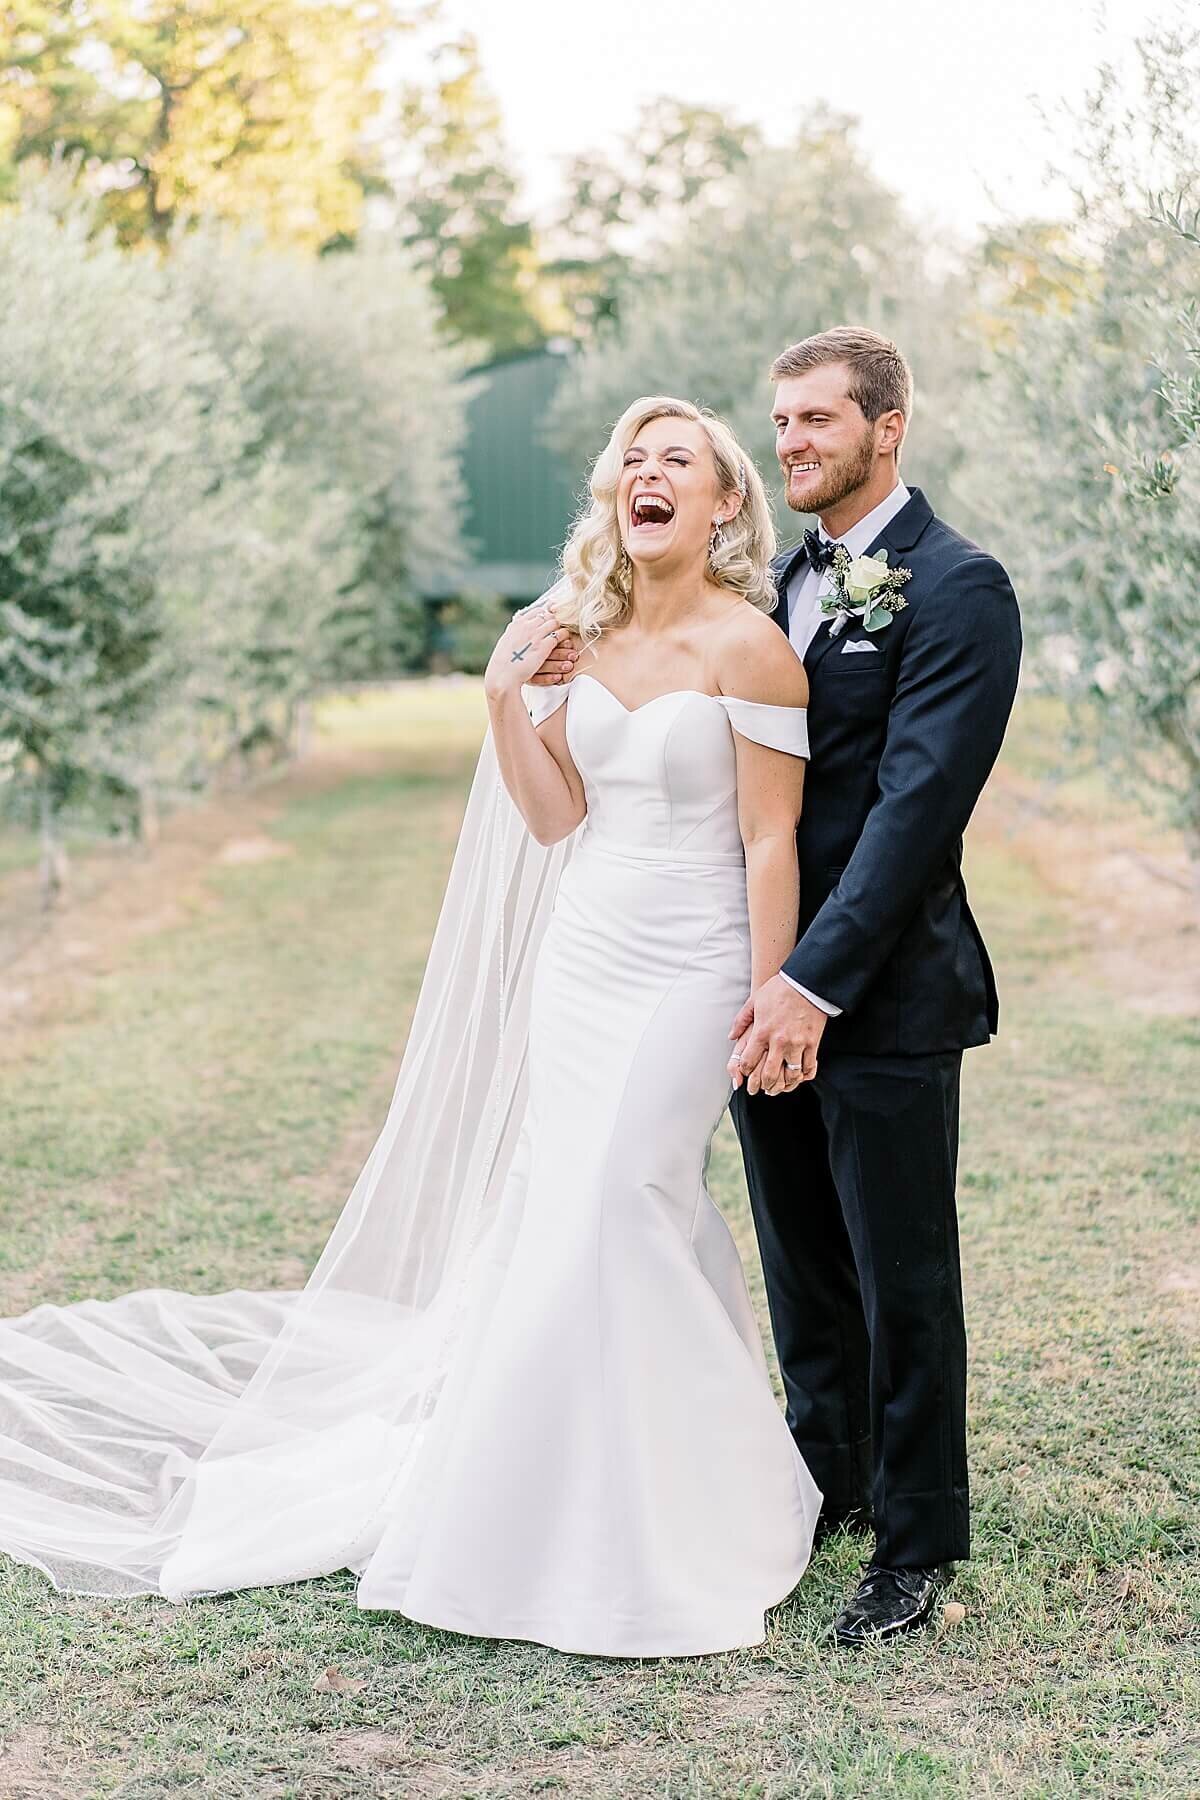 Bride and Groom Portraits in the Olive Grove at Annex Wedding Venue photography by Alicia Yarrish Photography